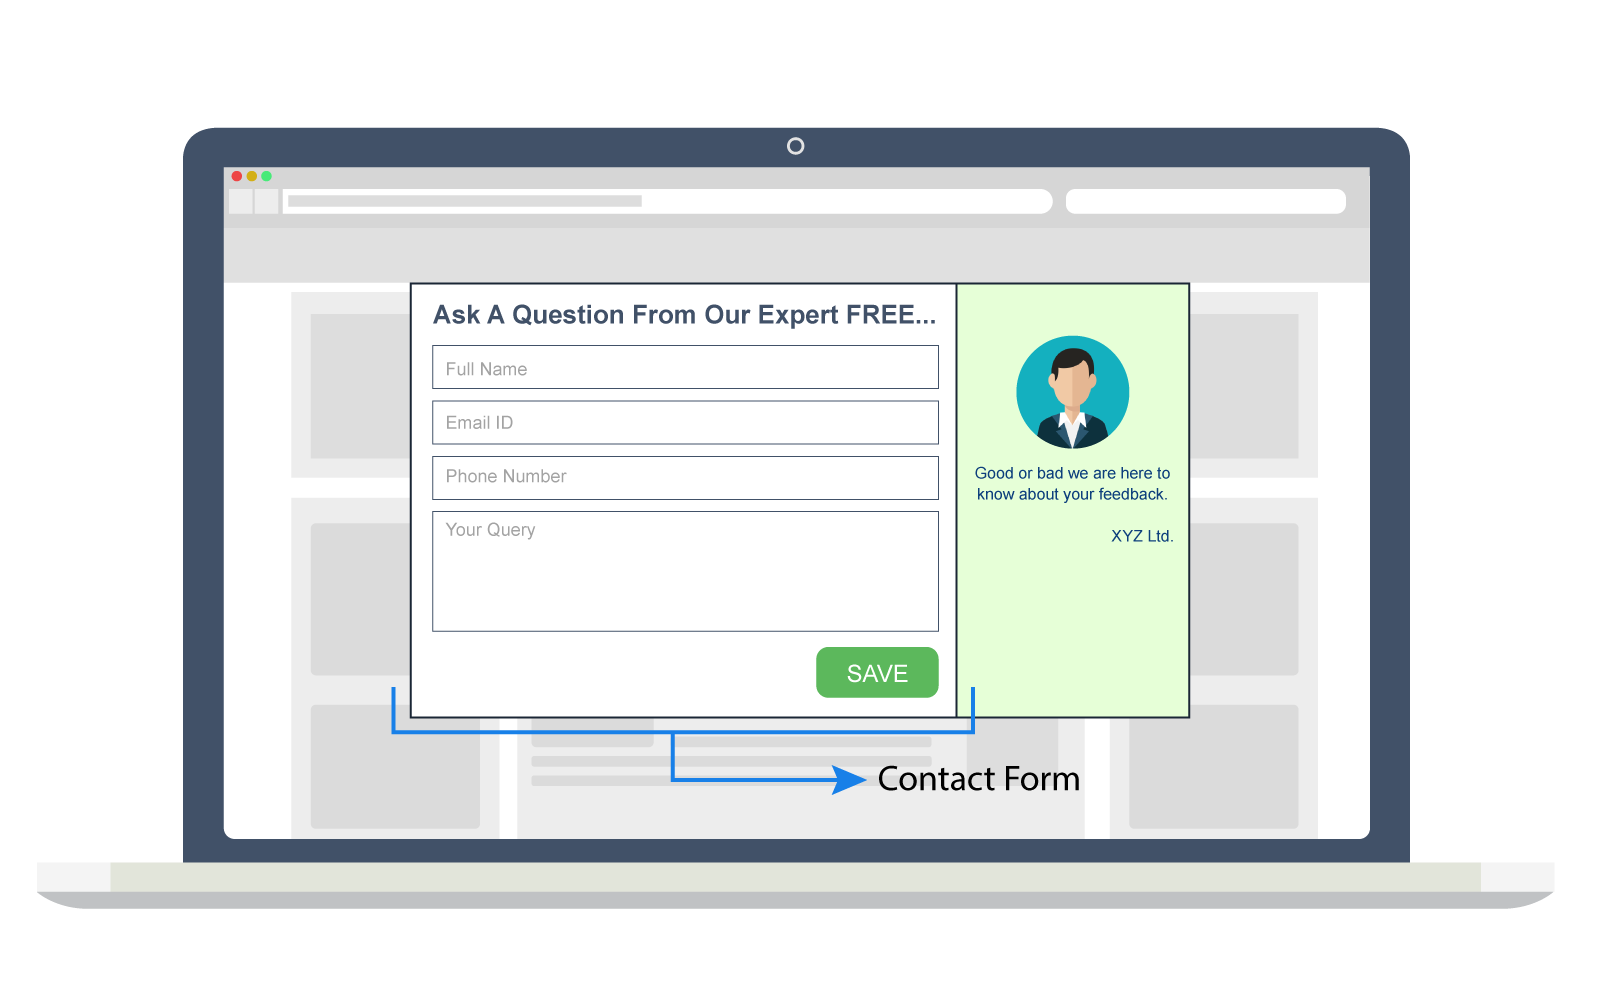 Engage contact form